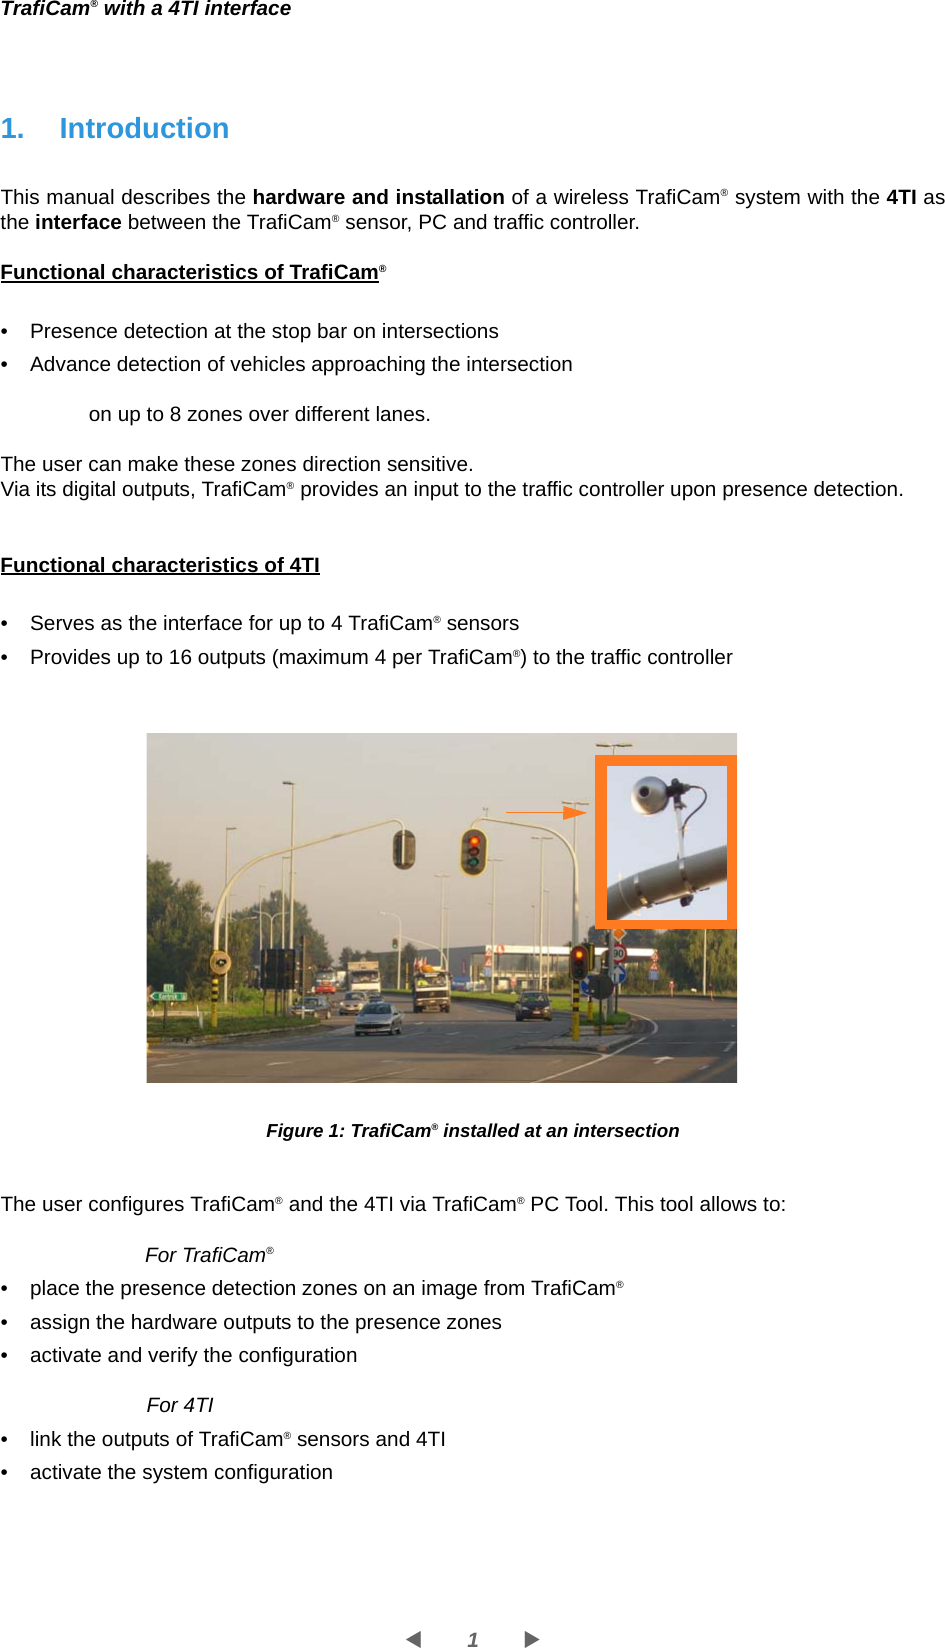 1WXTrafiCam® with a 4TI interface1. IntroductionThis manual describes the hardware and installation of a wireless TrafiCam® system with the 4TI as the interface between the TrafiCam® sensor, PC and traffic controller. Functional characteristics of TrafiCam®• Presence detection at the stop bar on intersections  • Advance detection of vehicles approaching the intersectionon up to 8 zones over different lanes. The user can make these zones direction sensitive.Via its digital outputs, TrafiCam® provides an input to the traffic controller upon presence detection. Functional characteristics of 4TI• Serves as the interface for up to 4 TrafiCam® sensors• Provides up to 16 outputs (maximum 4 per TrafiCam®) to the traffic controllerFigure 1: TrafiCam® installed at an intersectionThe user configures TrafiCam® and the 4TI via TrafiCam® PC Tool. This tool allows to:For TrafiCam®• place the presence detection zones on an image from TrafiCam®• assign the hardware outputs to the presence zones• activate and verify the configurationFor 4TI• link the outputs of TrafiCam® sensors and 4TI• activate the system configuration